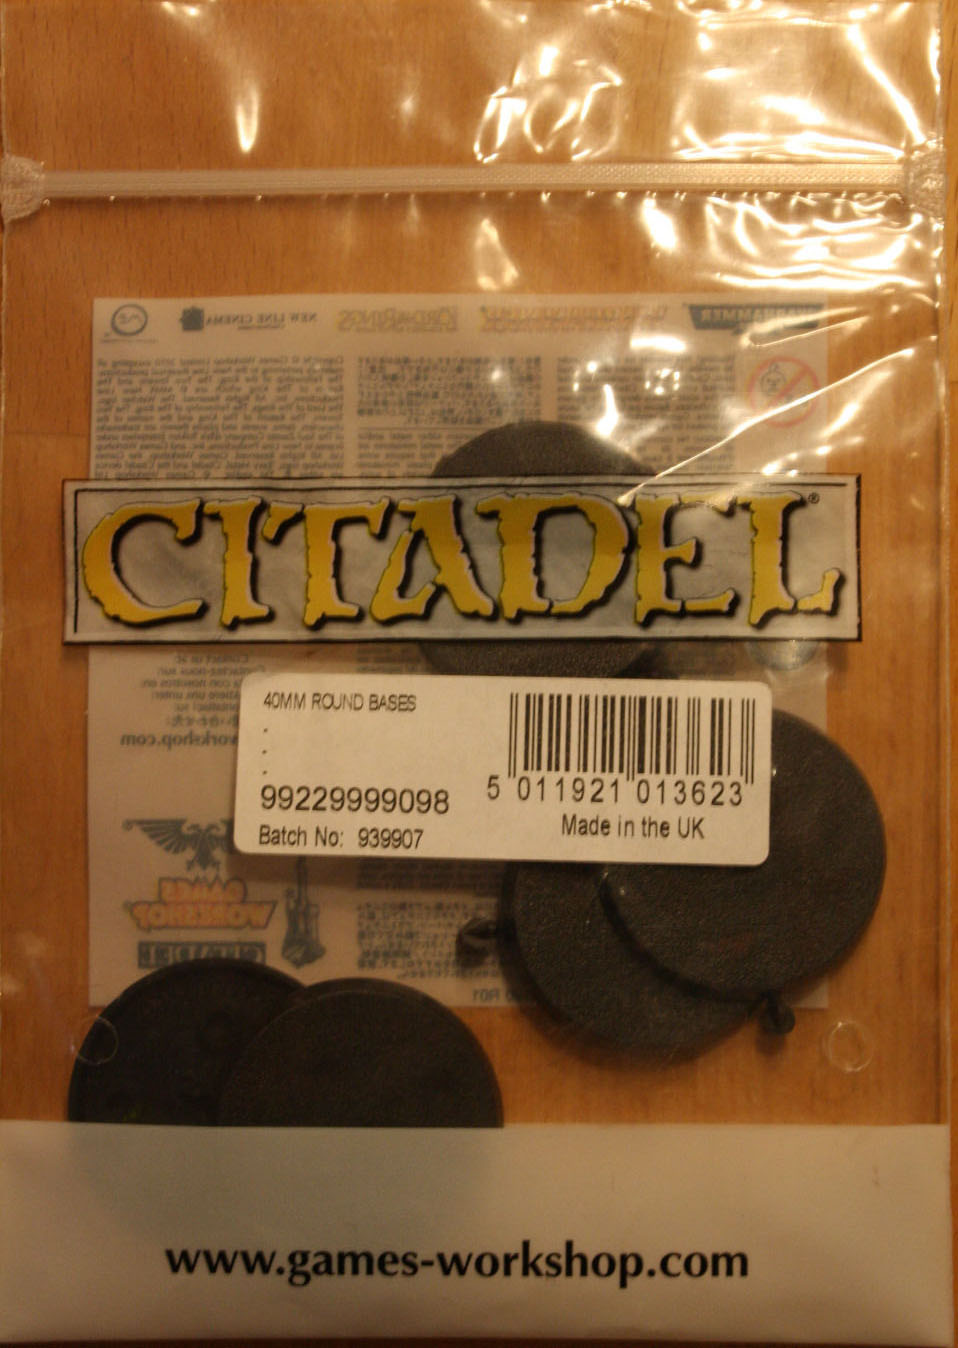 Collector-Info: Modelling Supplies - Paints & Tools - Citadel